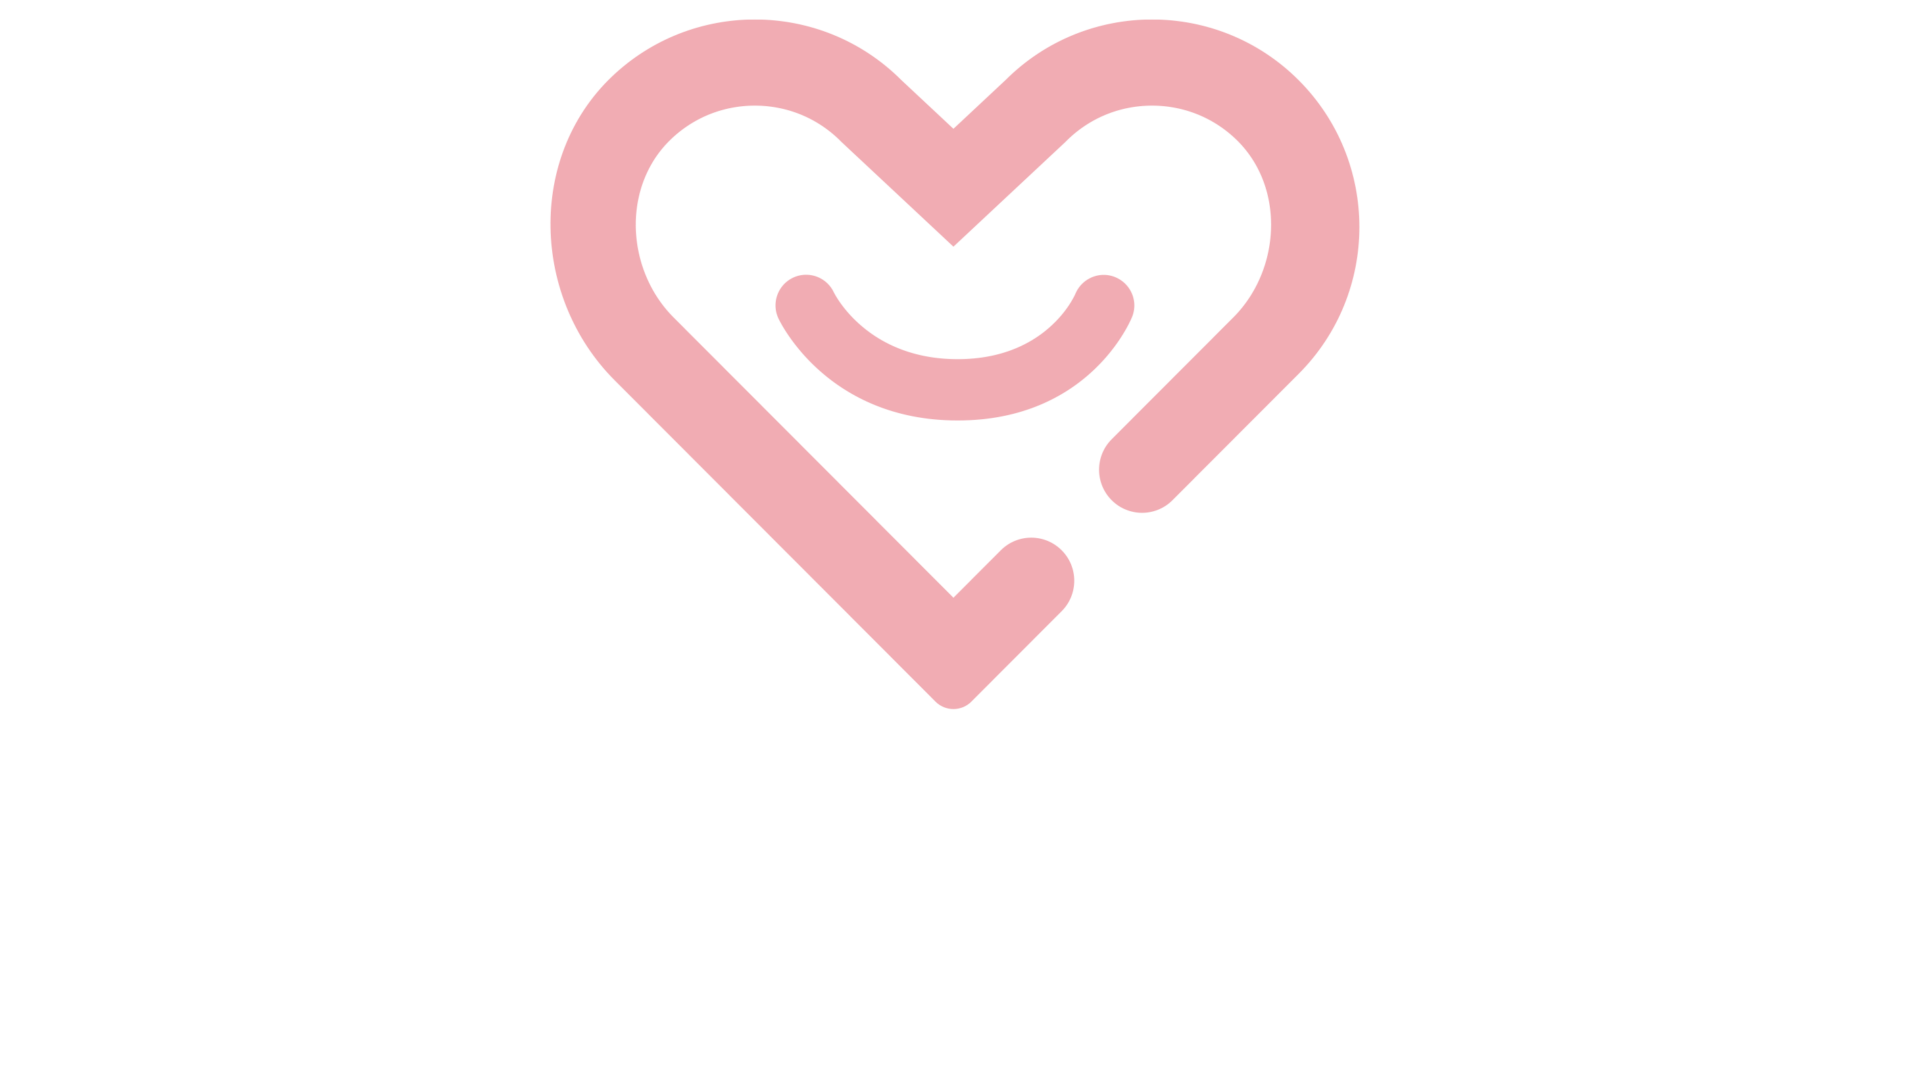 Simple Mental Health - White and Pink - Vertical Full Logo